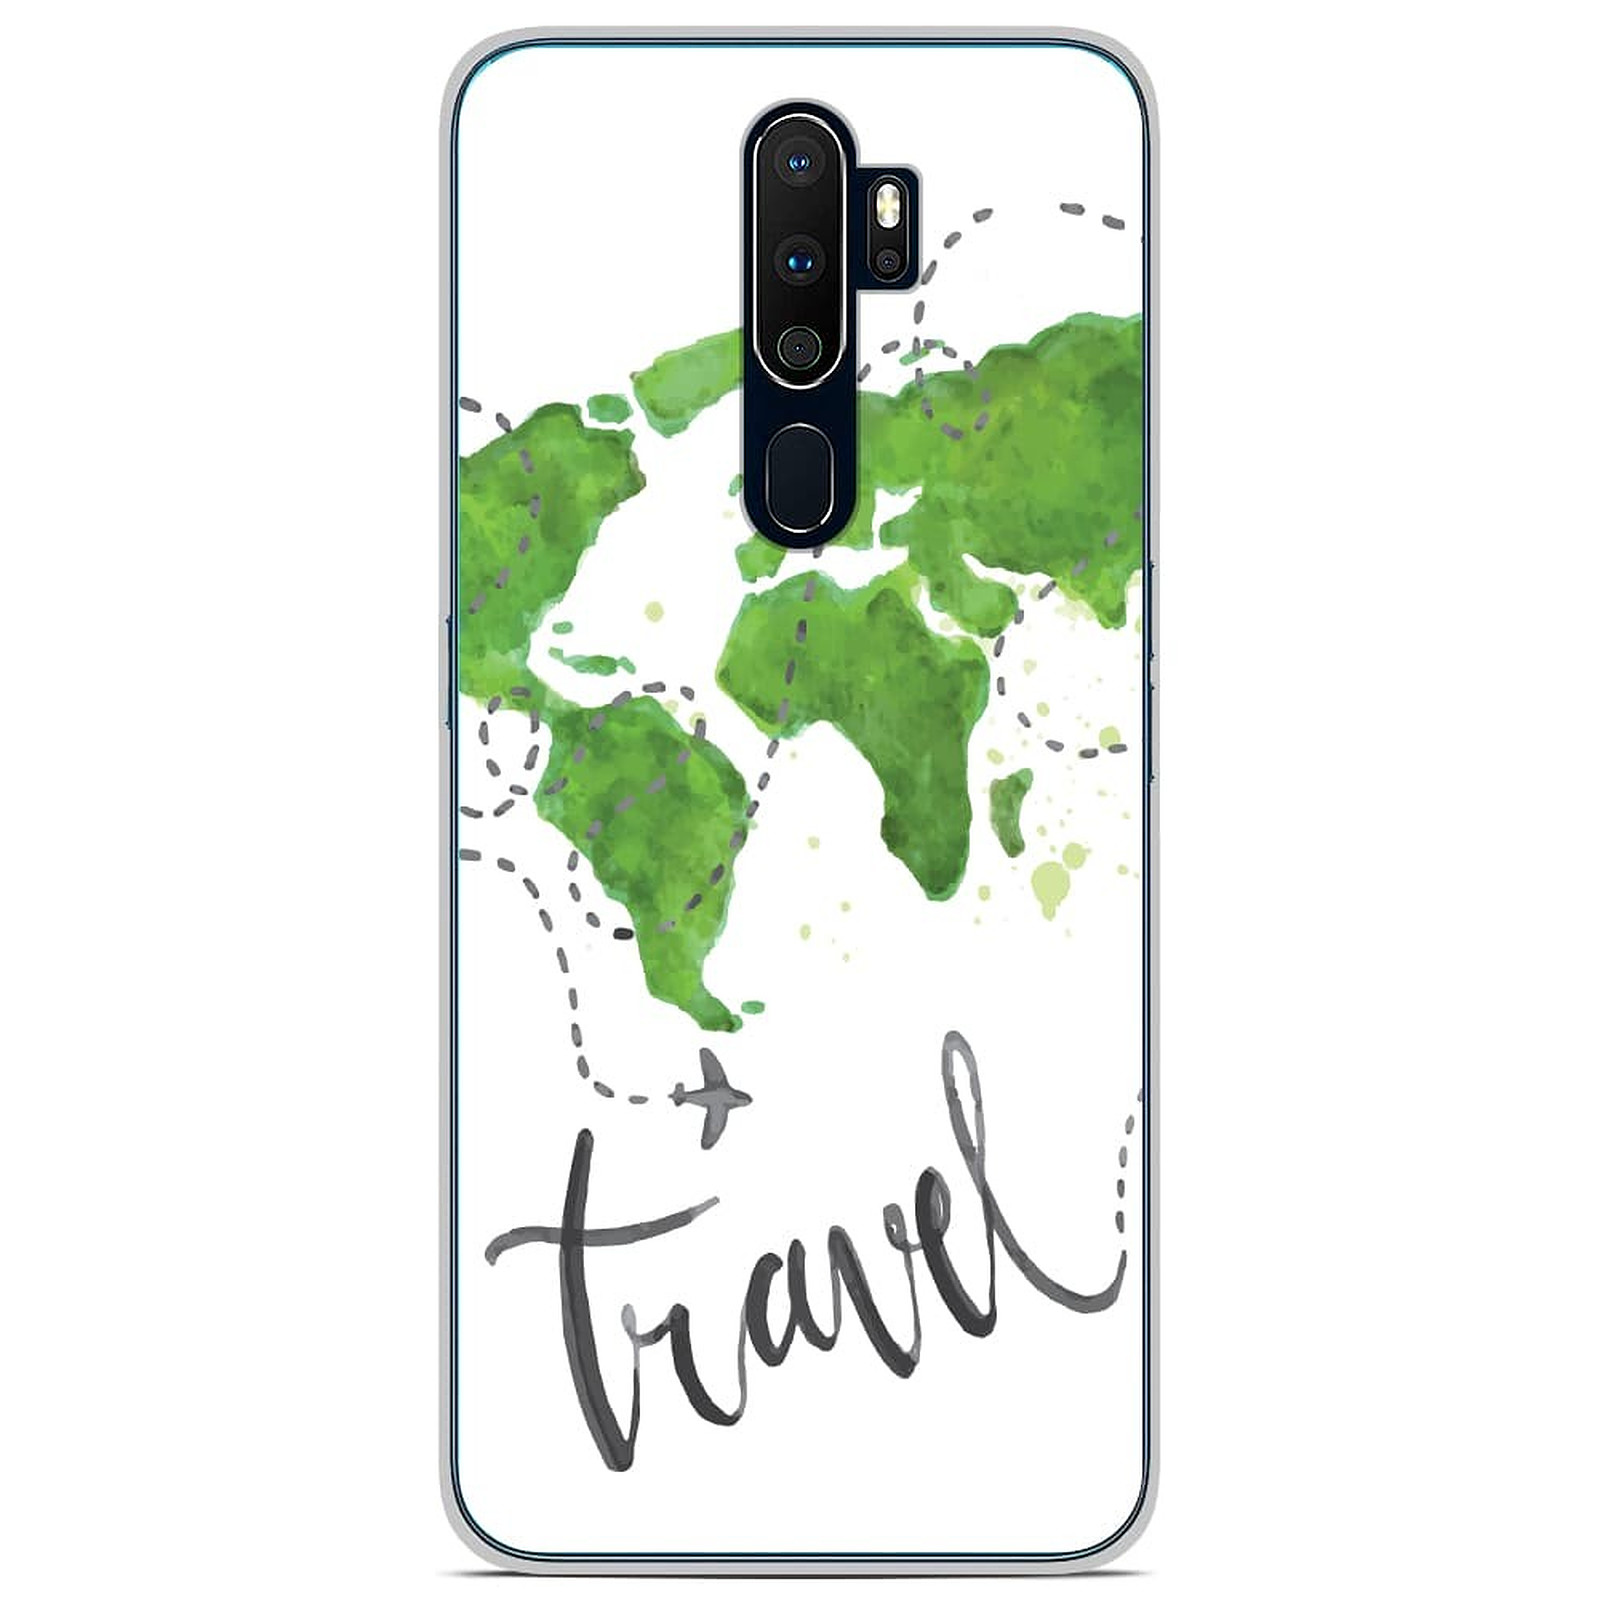 1001 Coques Coque silicone gel Oppo A9 2020 motif Map Travel - Coque telephone 1001Coques